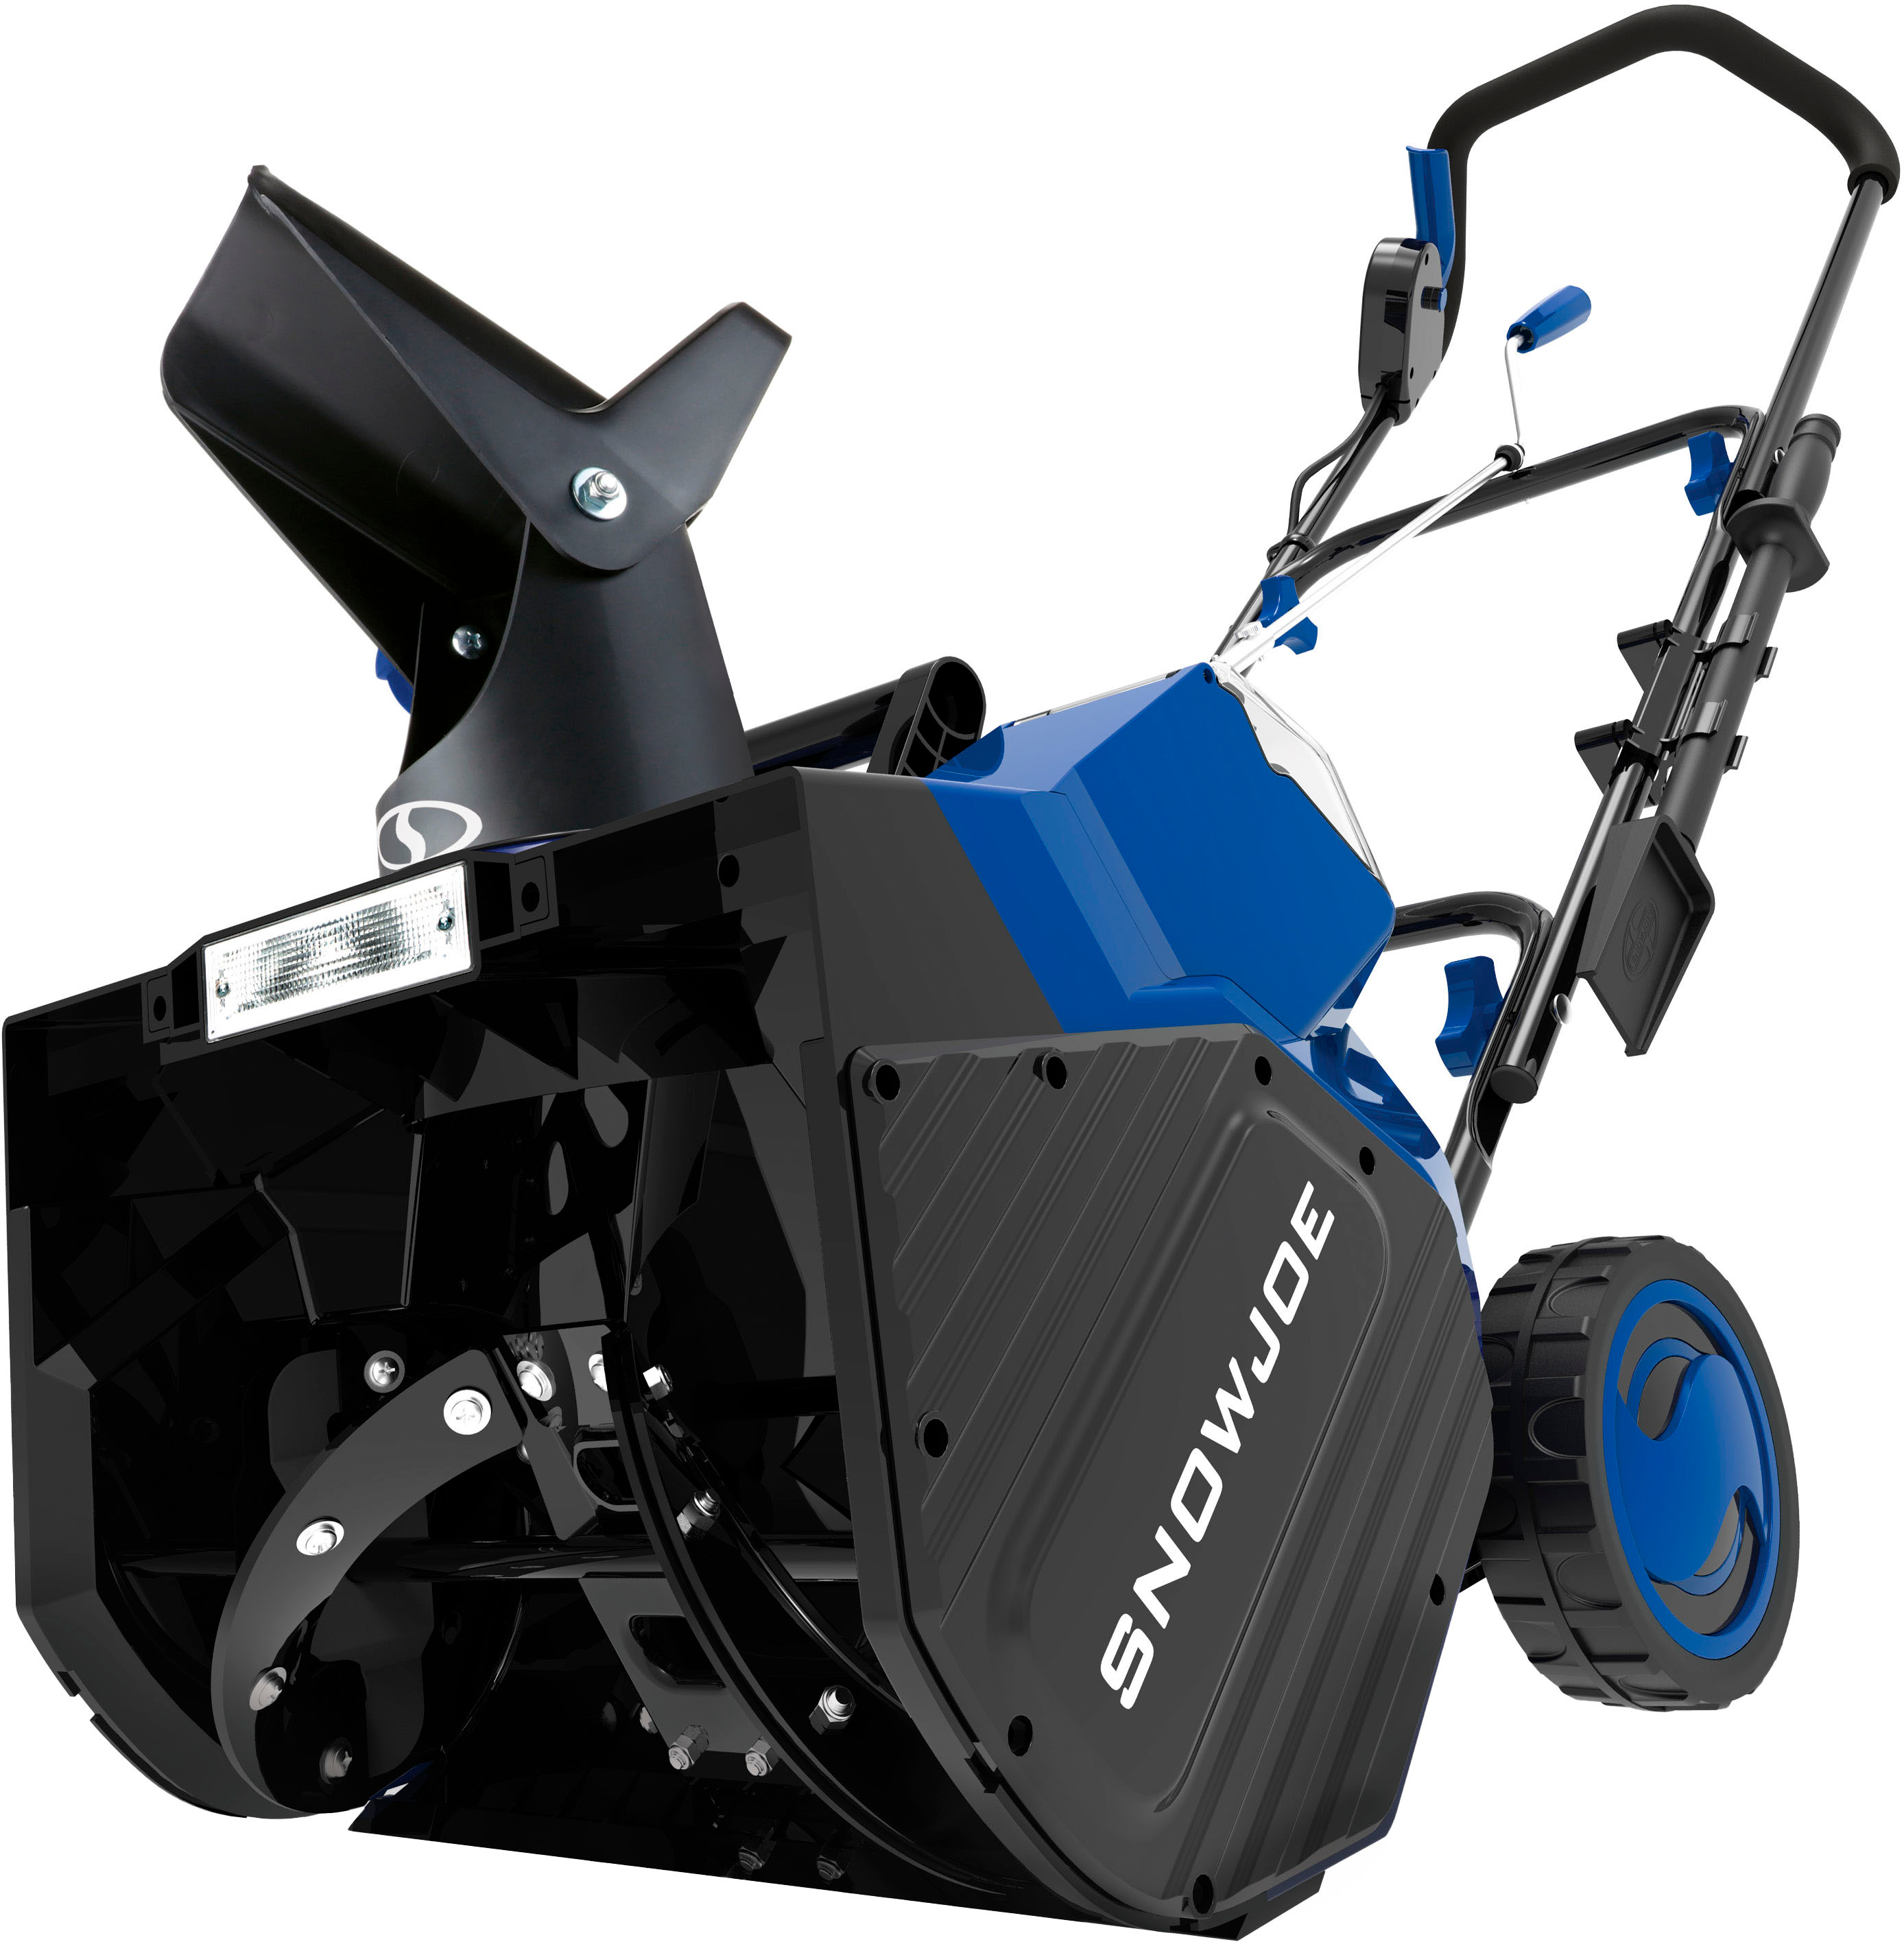 Snowjoe 18 inch cordless snow blower with 2×4ah batteries and charger $200